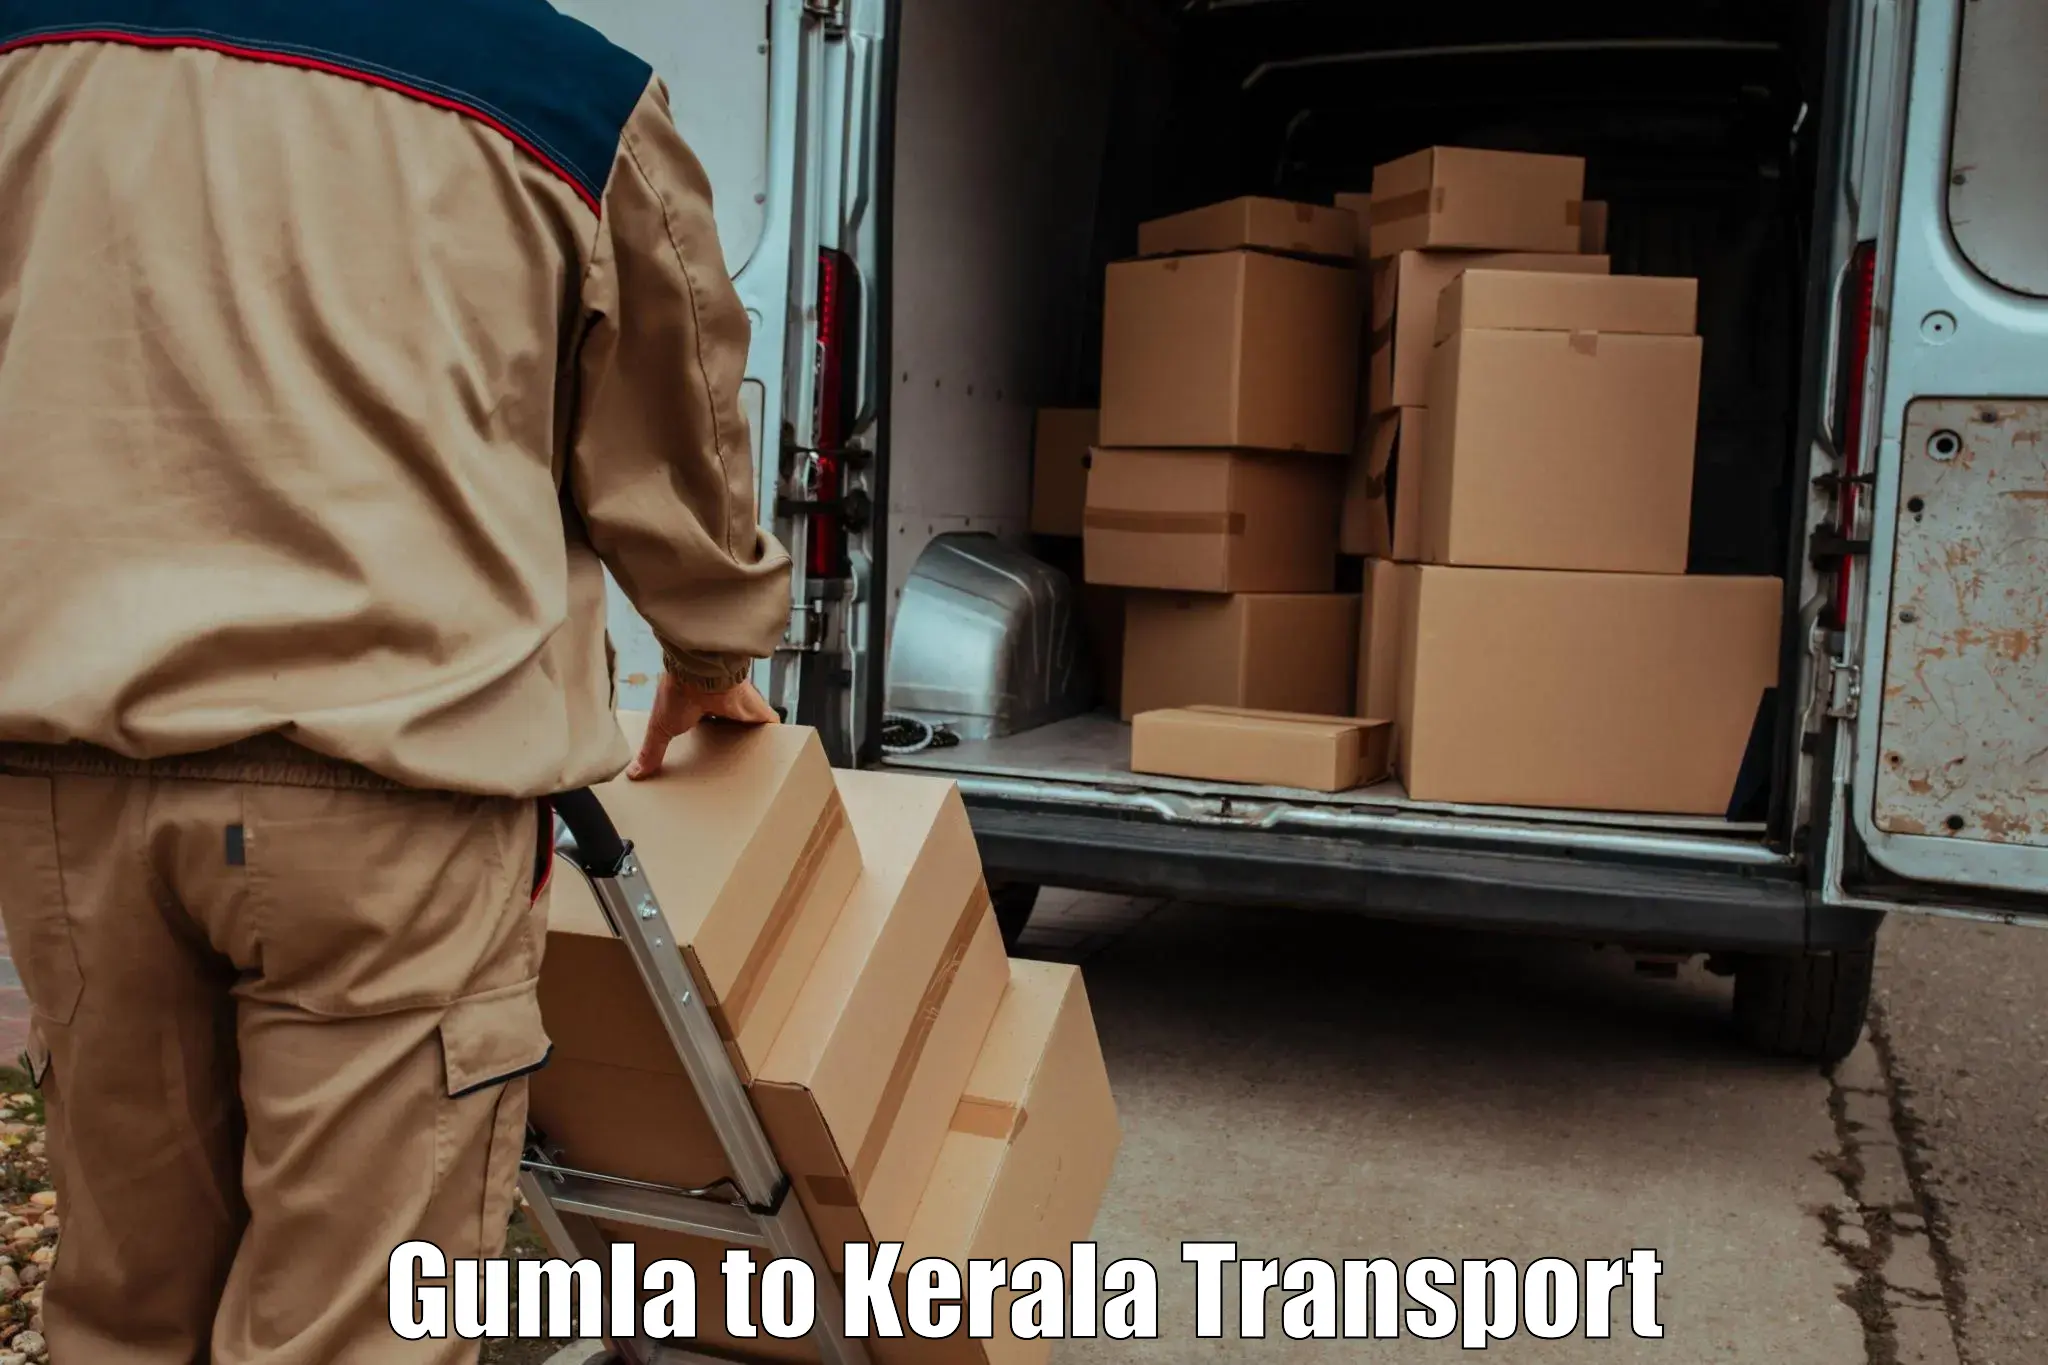 Cargo train transport services Gumla to Cochin University of Science and Technology